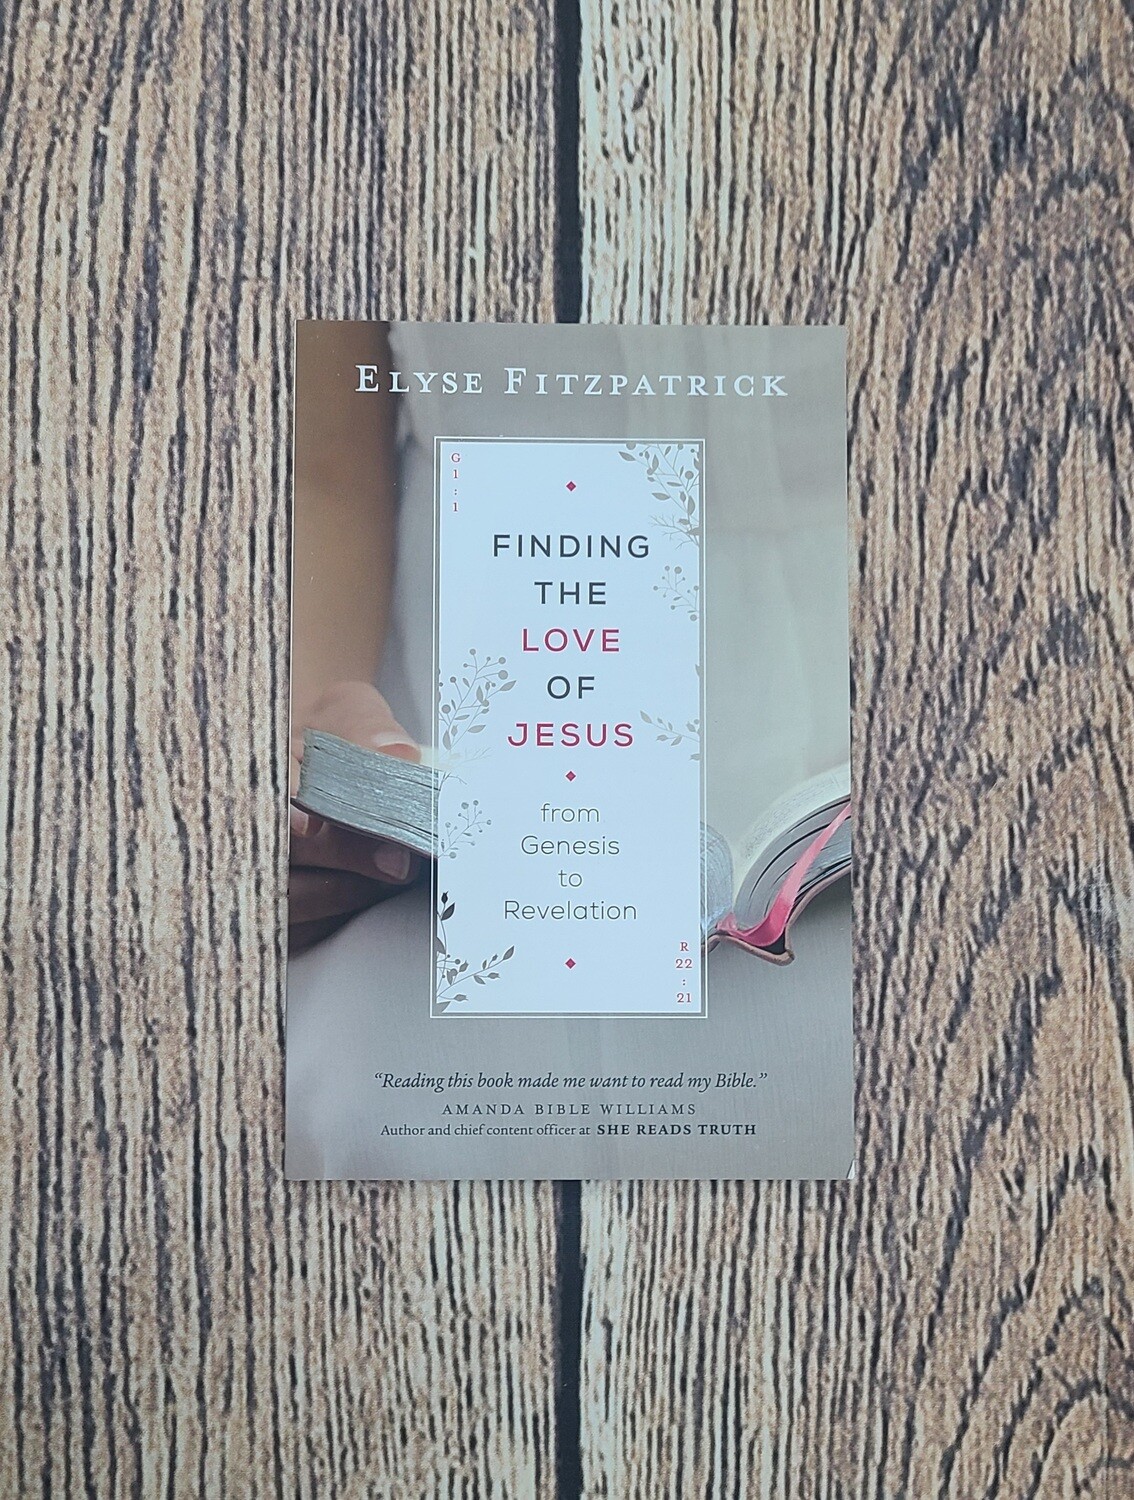 Finding the Love of Jesus from Genesis to Revelation by Elyse Fitzpatrick